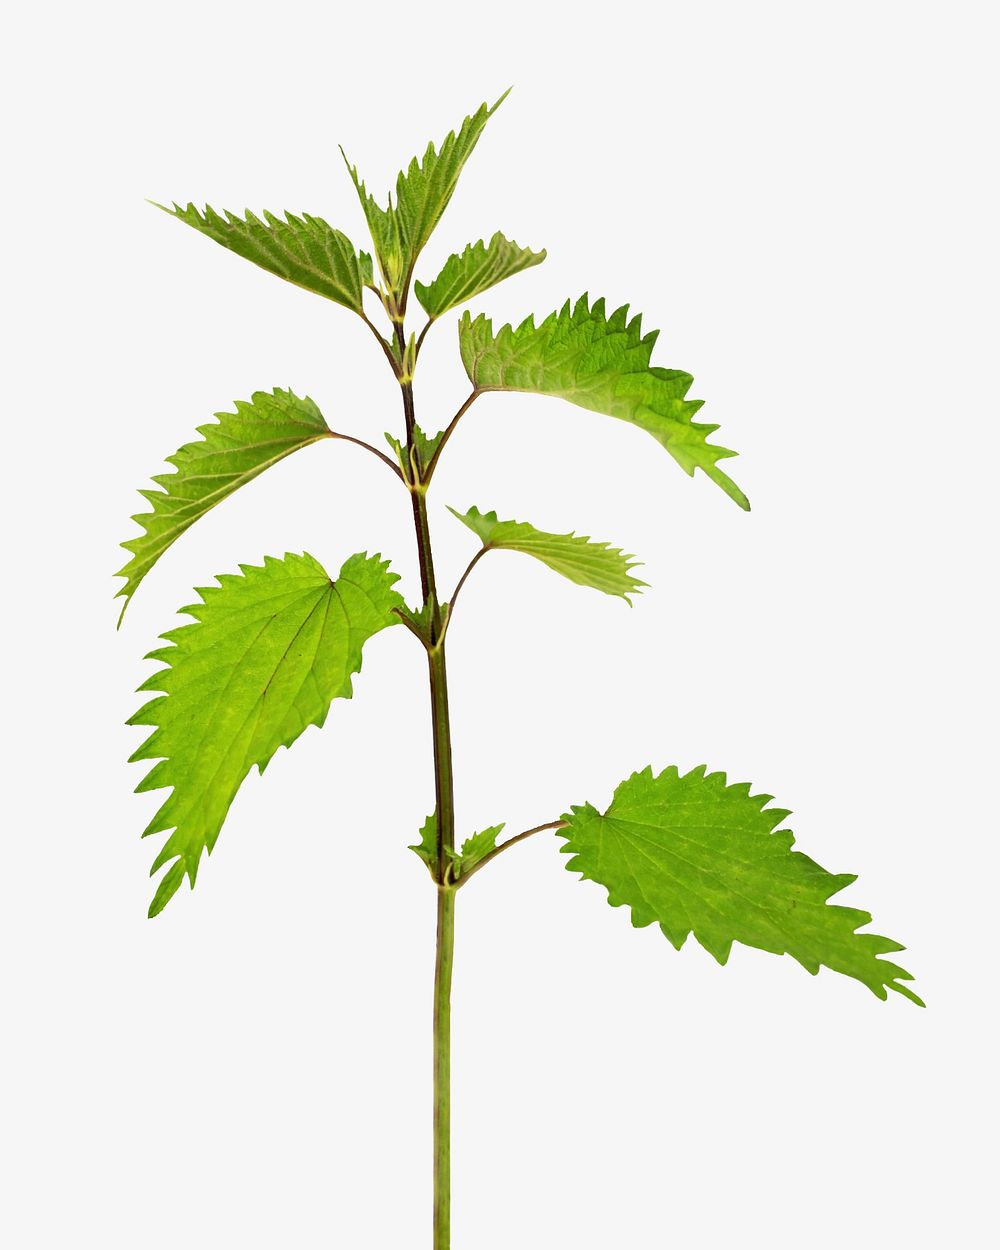 Common nettle plant collage element, isolated image